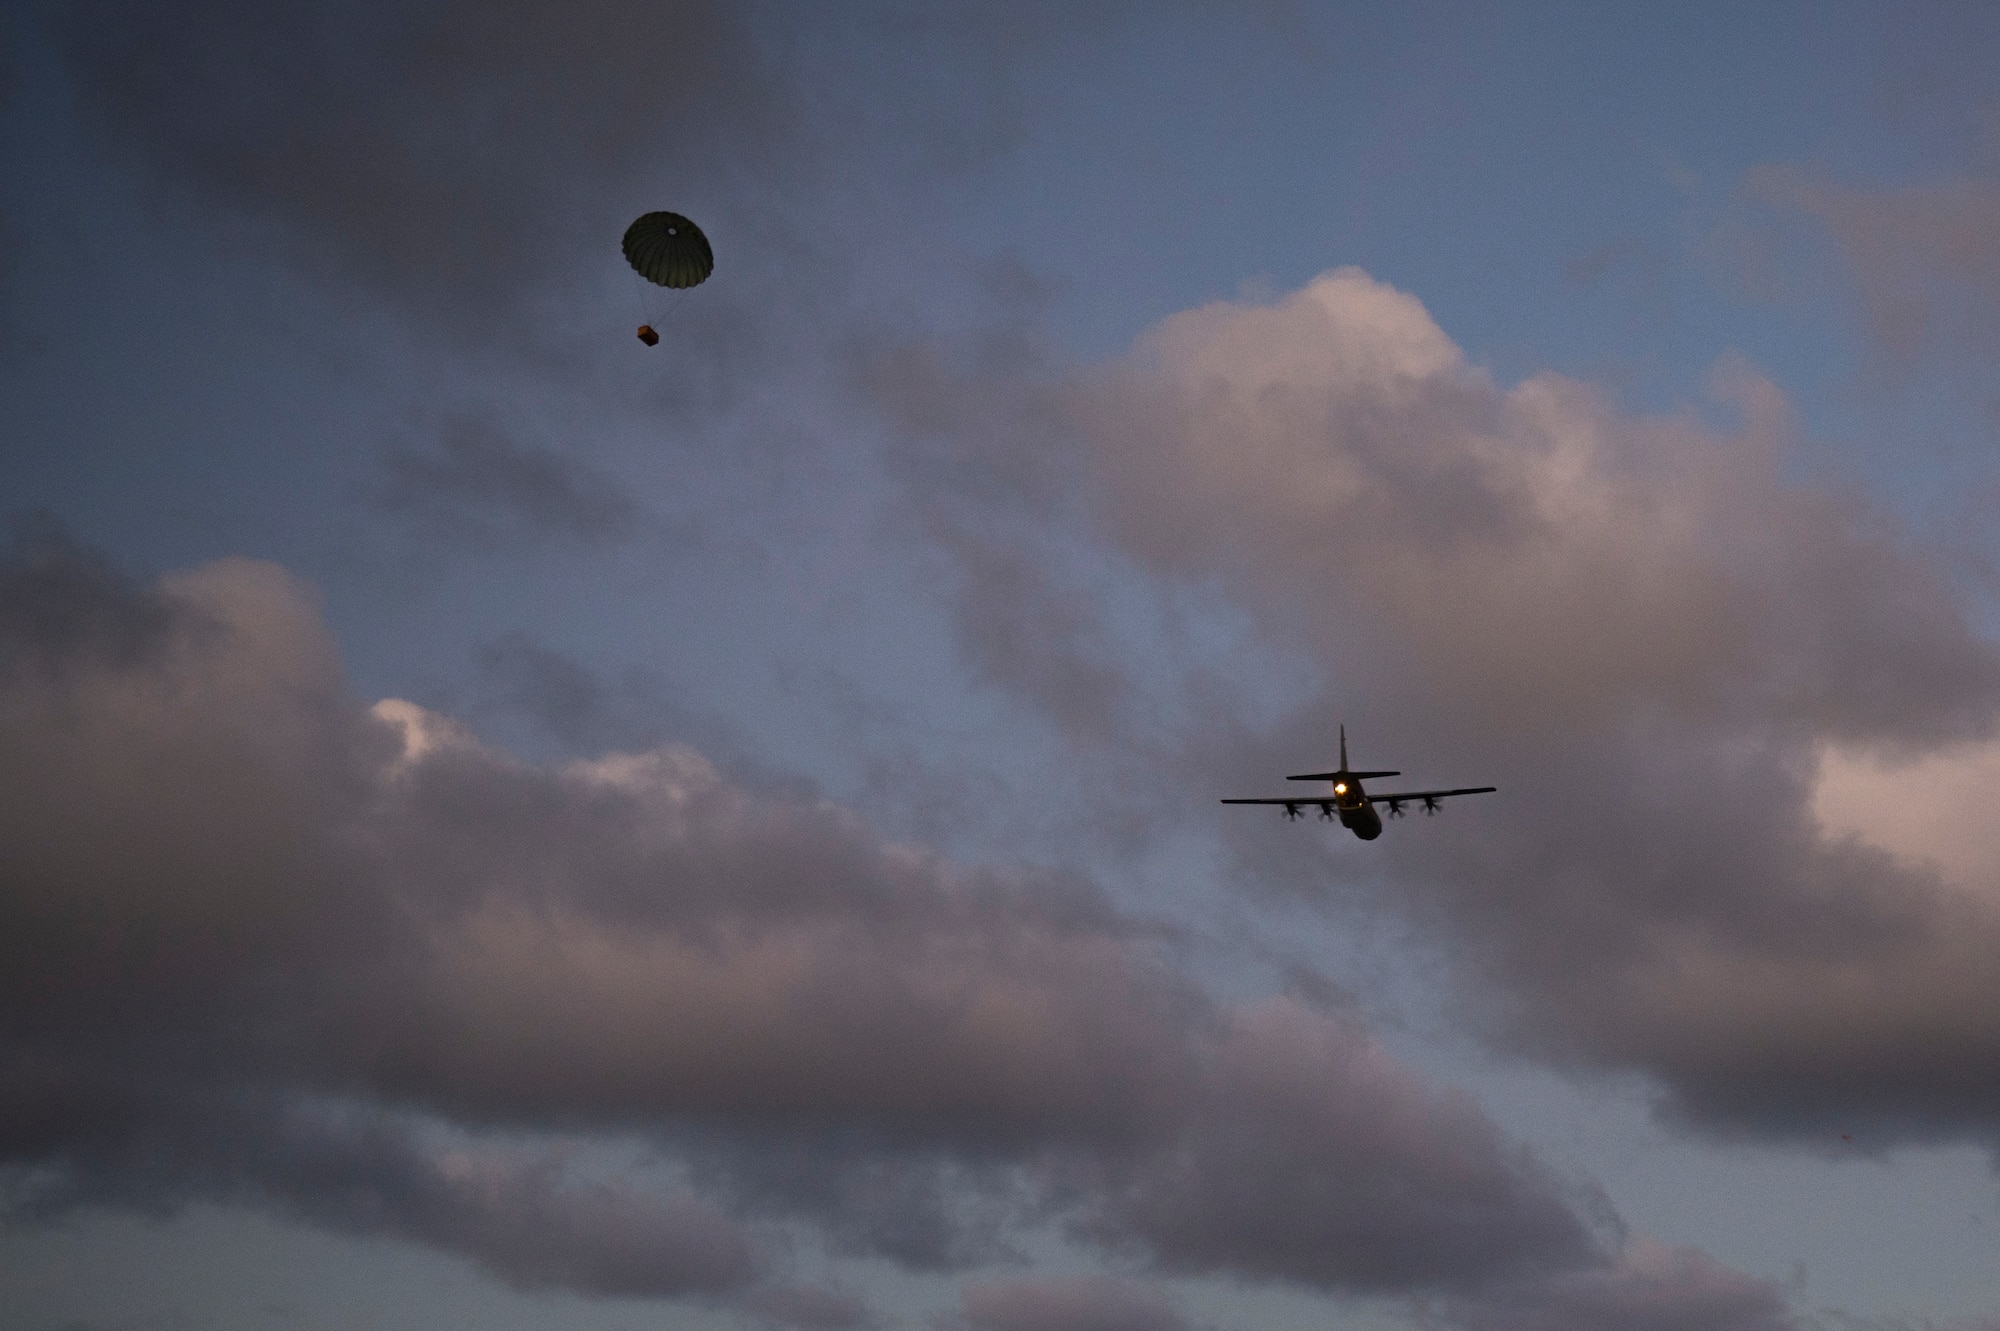 A C-130J Super Hercules makes an airdrop as a part of a training exercise over Pacific Regional Training Center, Andersen Air Force Base, Guam, Jan. 19, 2023. The 36th Contingency Response Squadron was conducting a training exercise to set up a drop zone while the C-130J Super Hercules crew aimed to put the drops on target. (U.S. Air Force photo by Airman 1st Class Spencer Perkins)